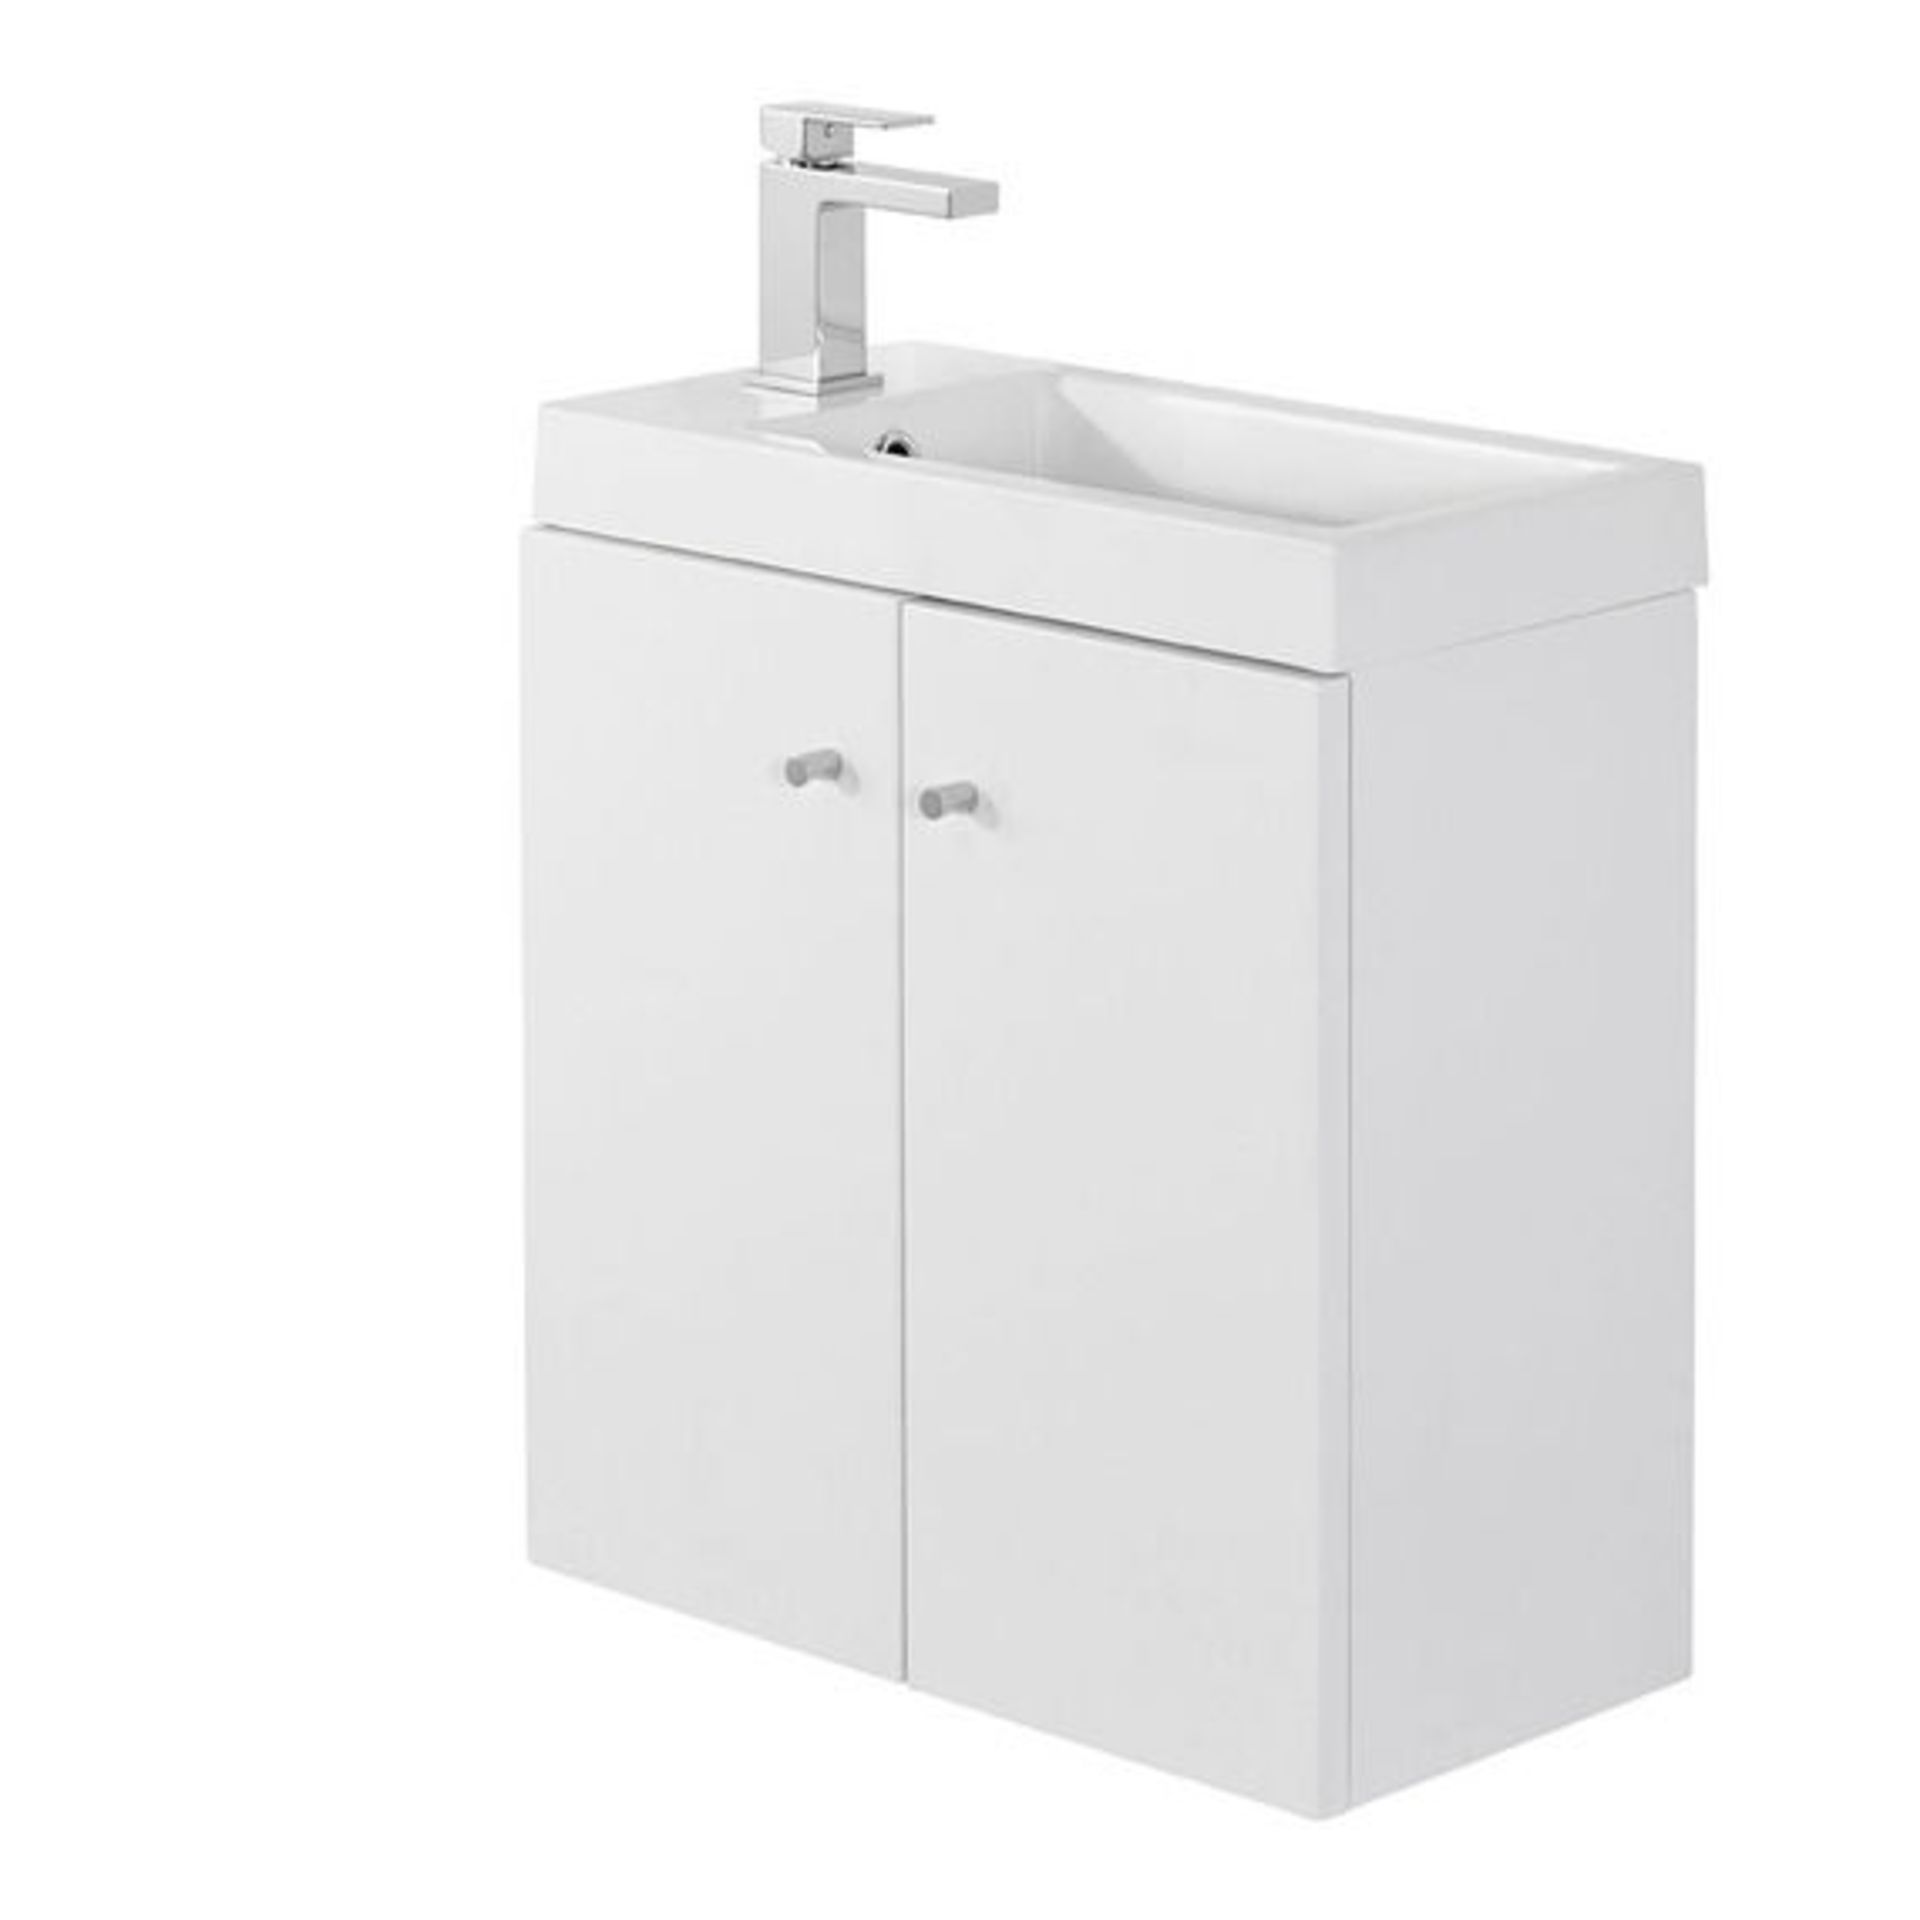 10 x Alpine Duo 495 Wall Hung Vanity Unit  - Gloss White - Brand New Boxed Stock - Dimensions: W49.5 - Image 3 of 4